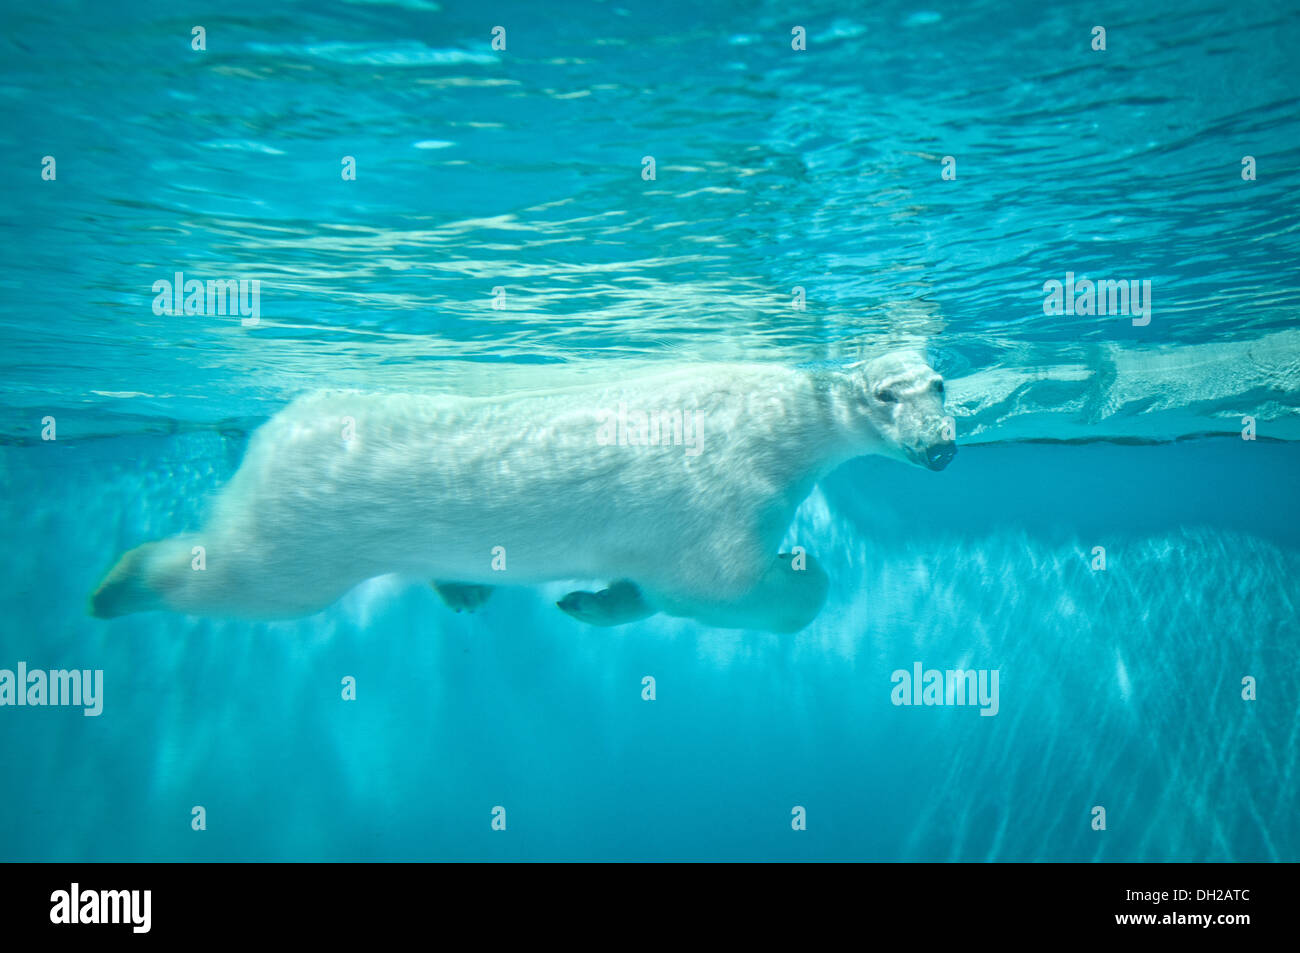 Swimming polar bear in Beijing Zoo, located in Xicheng District, Beijing, China Stock Photo